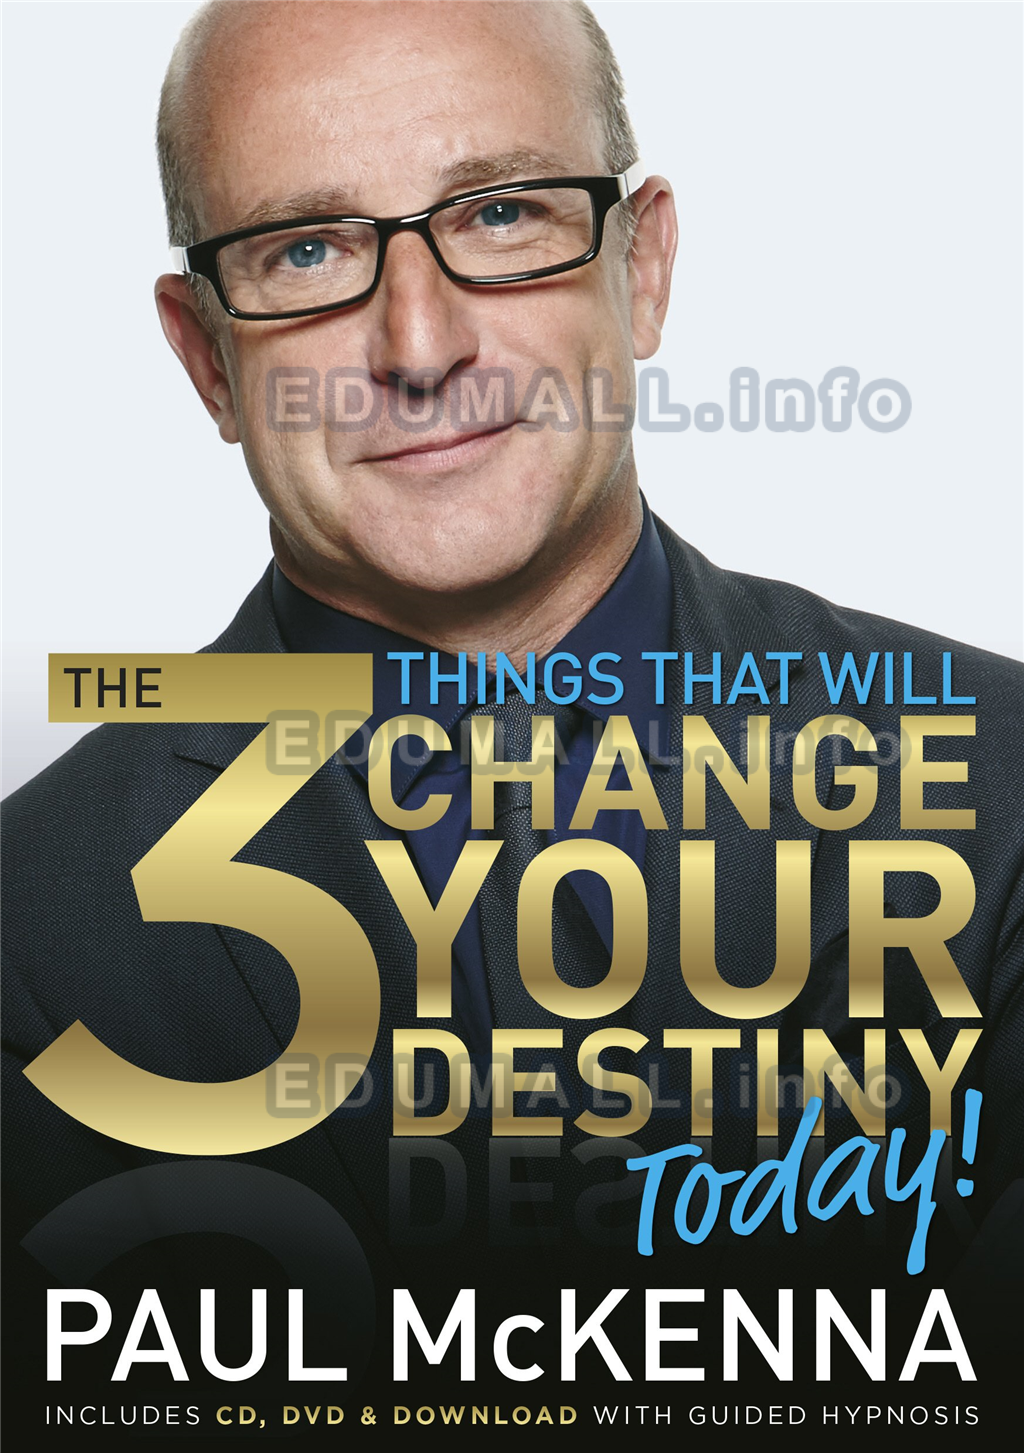 Paul McKenna - The 3 Things That will Change Your Destiny Today